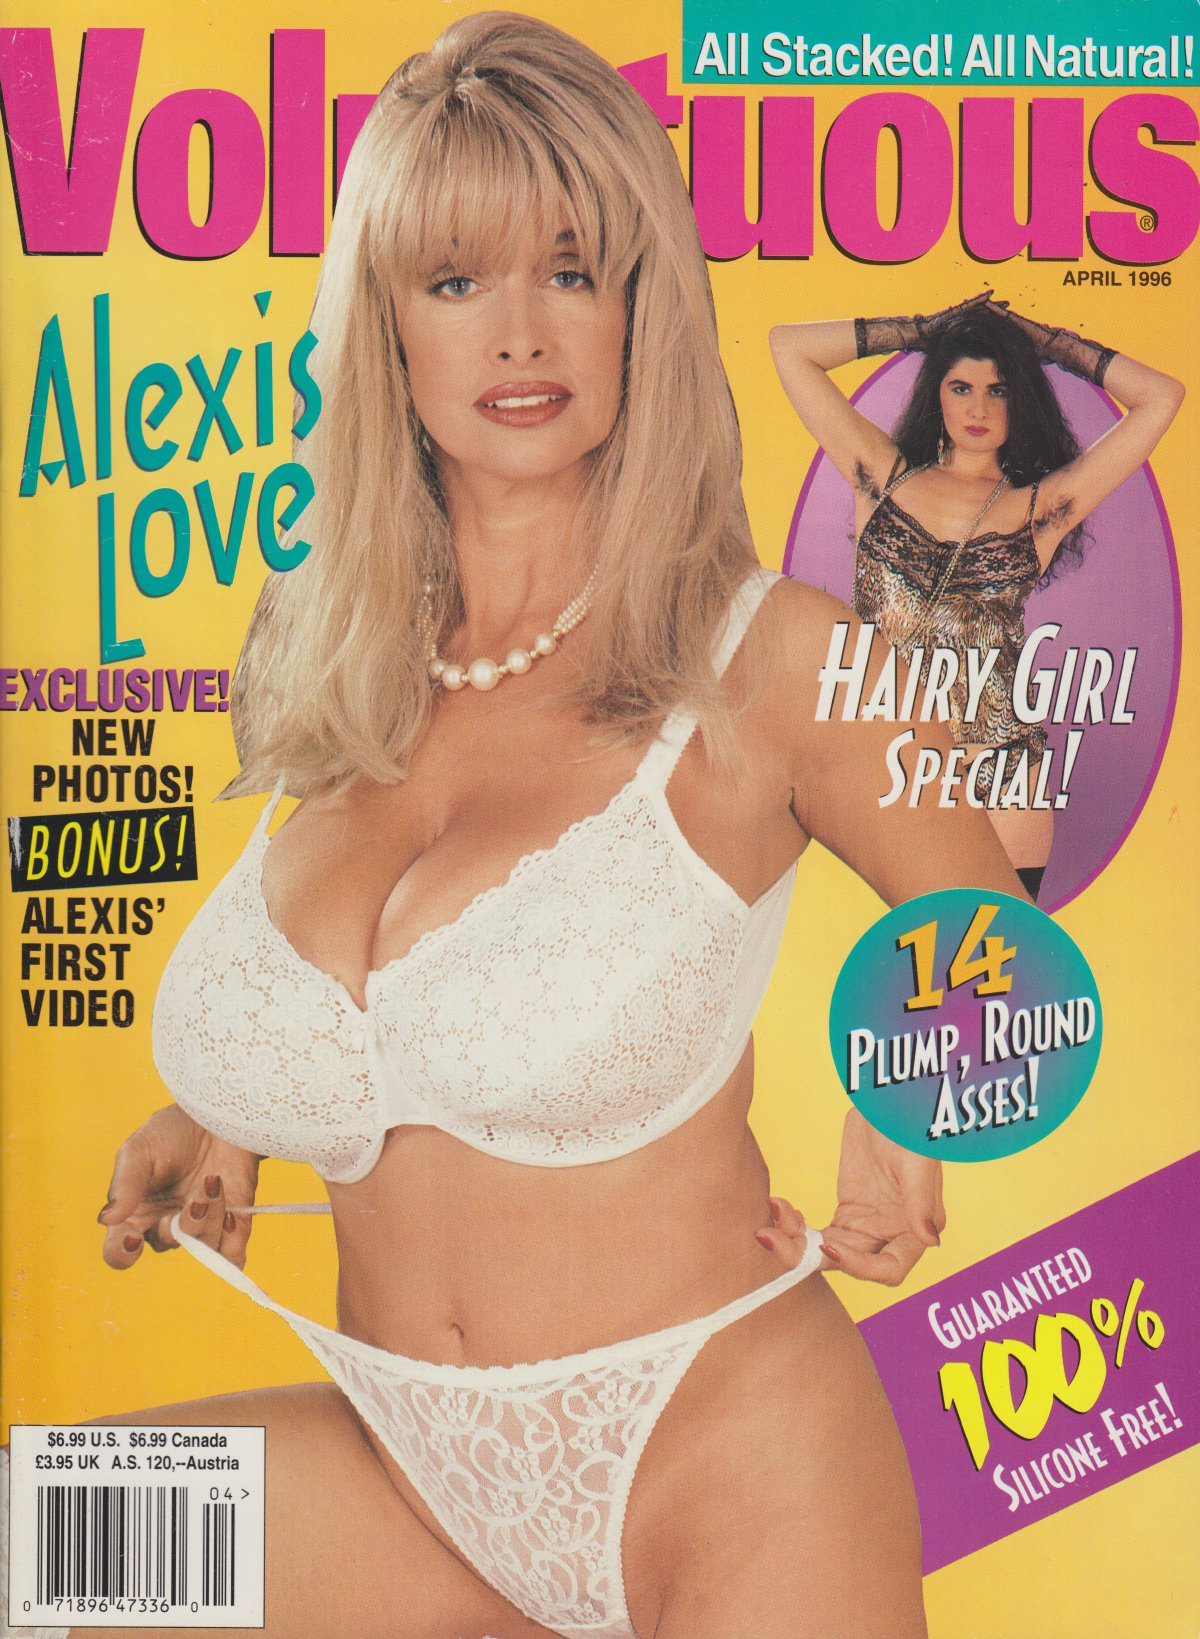 Voluptuous April 1996 magazine back issue Voluptuous magizine back copy Voluptuous April 1996 Magazine Back Issue Published by Score Publishing Group, Specializing in Large Breasted Voluptuous Women. 